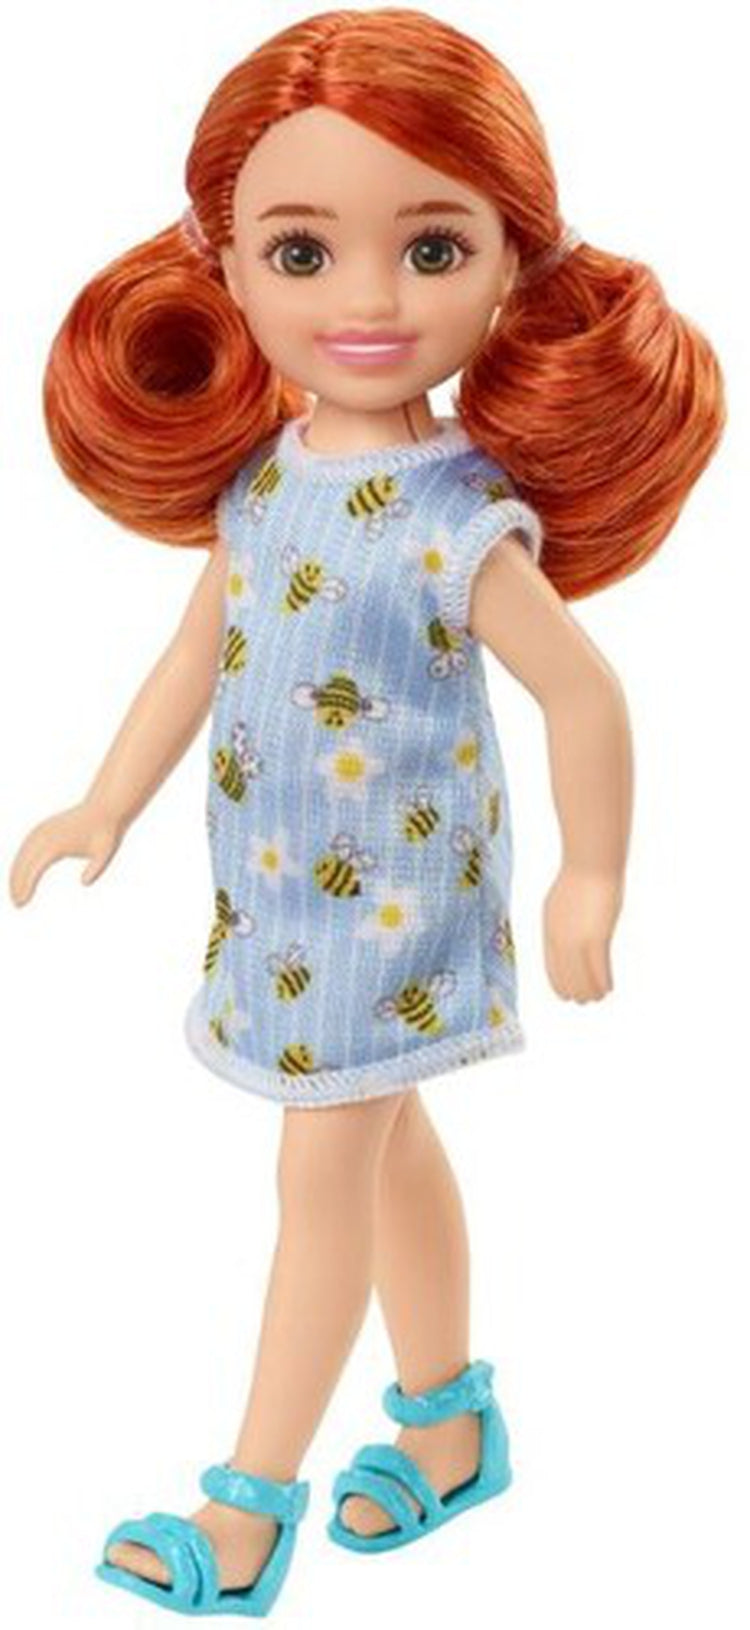 Mattel - Barbie Chelsea Doll with Bumble Bee Dress, Red Hair